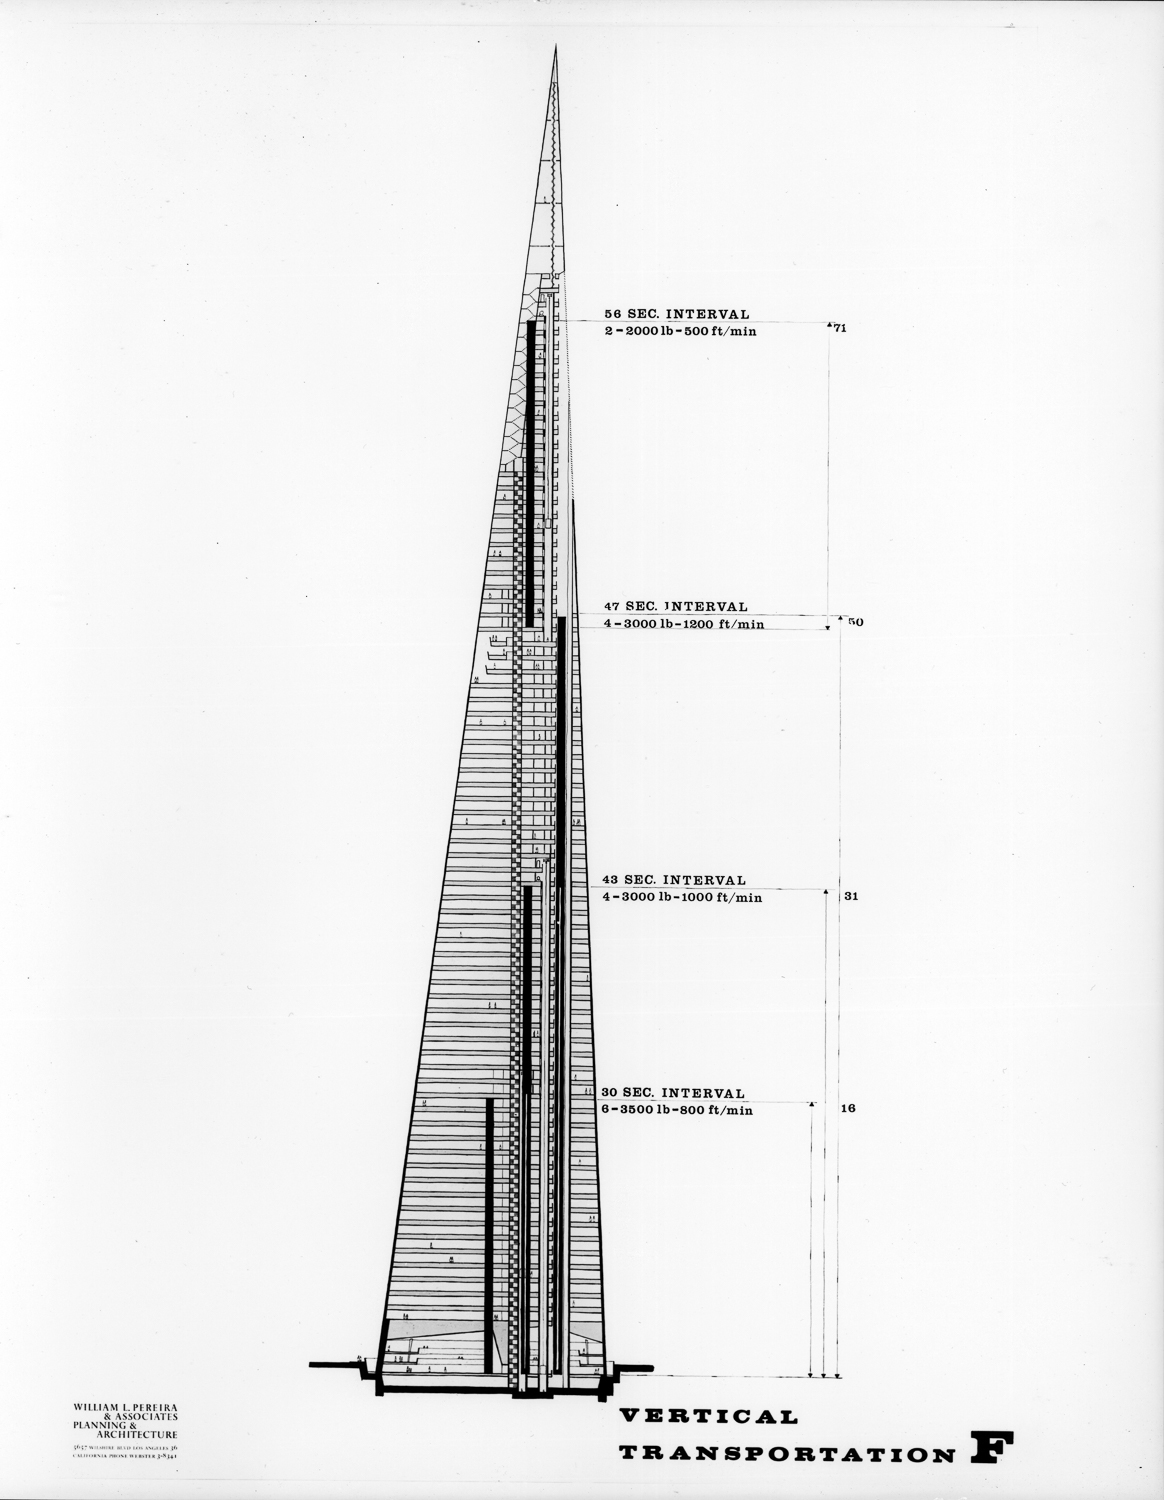 The unbuilt ABC Tower in New York early study, illustration by William L Pereira & Associates courtesy the USC Library